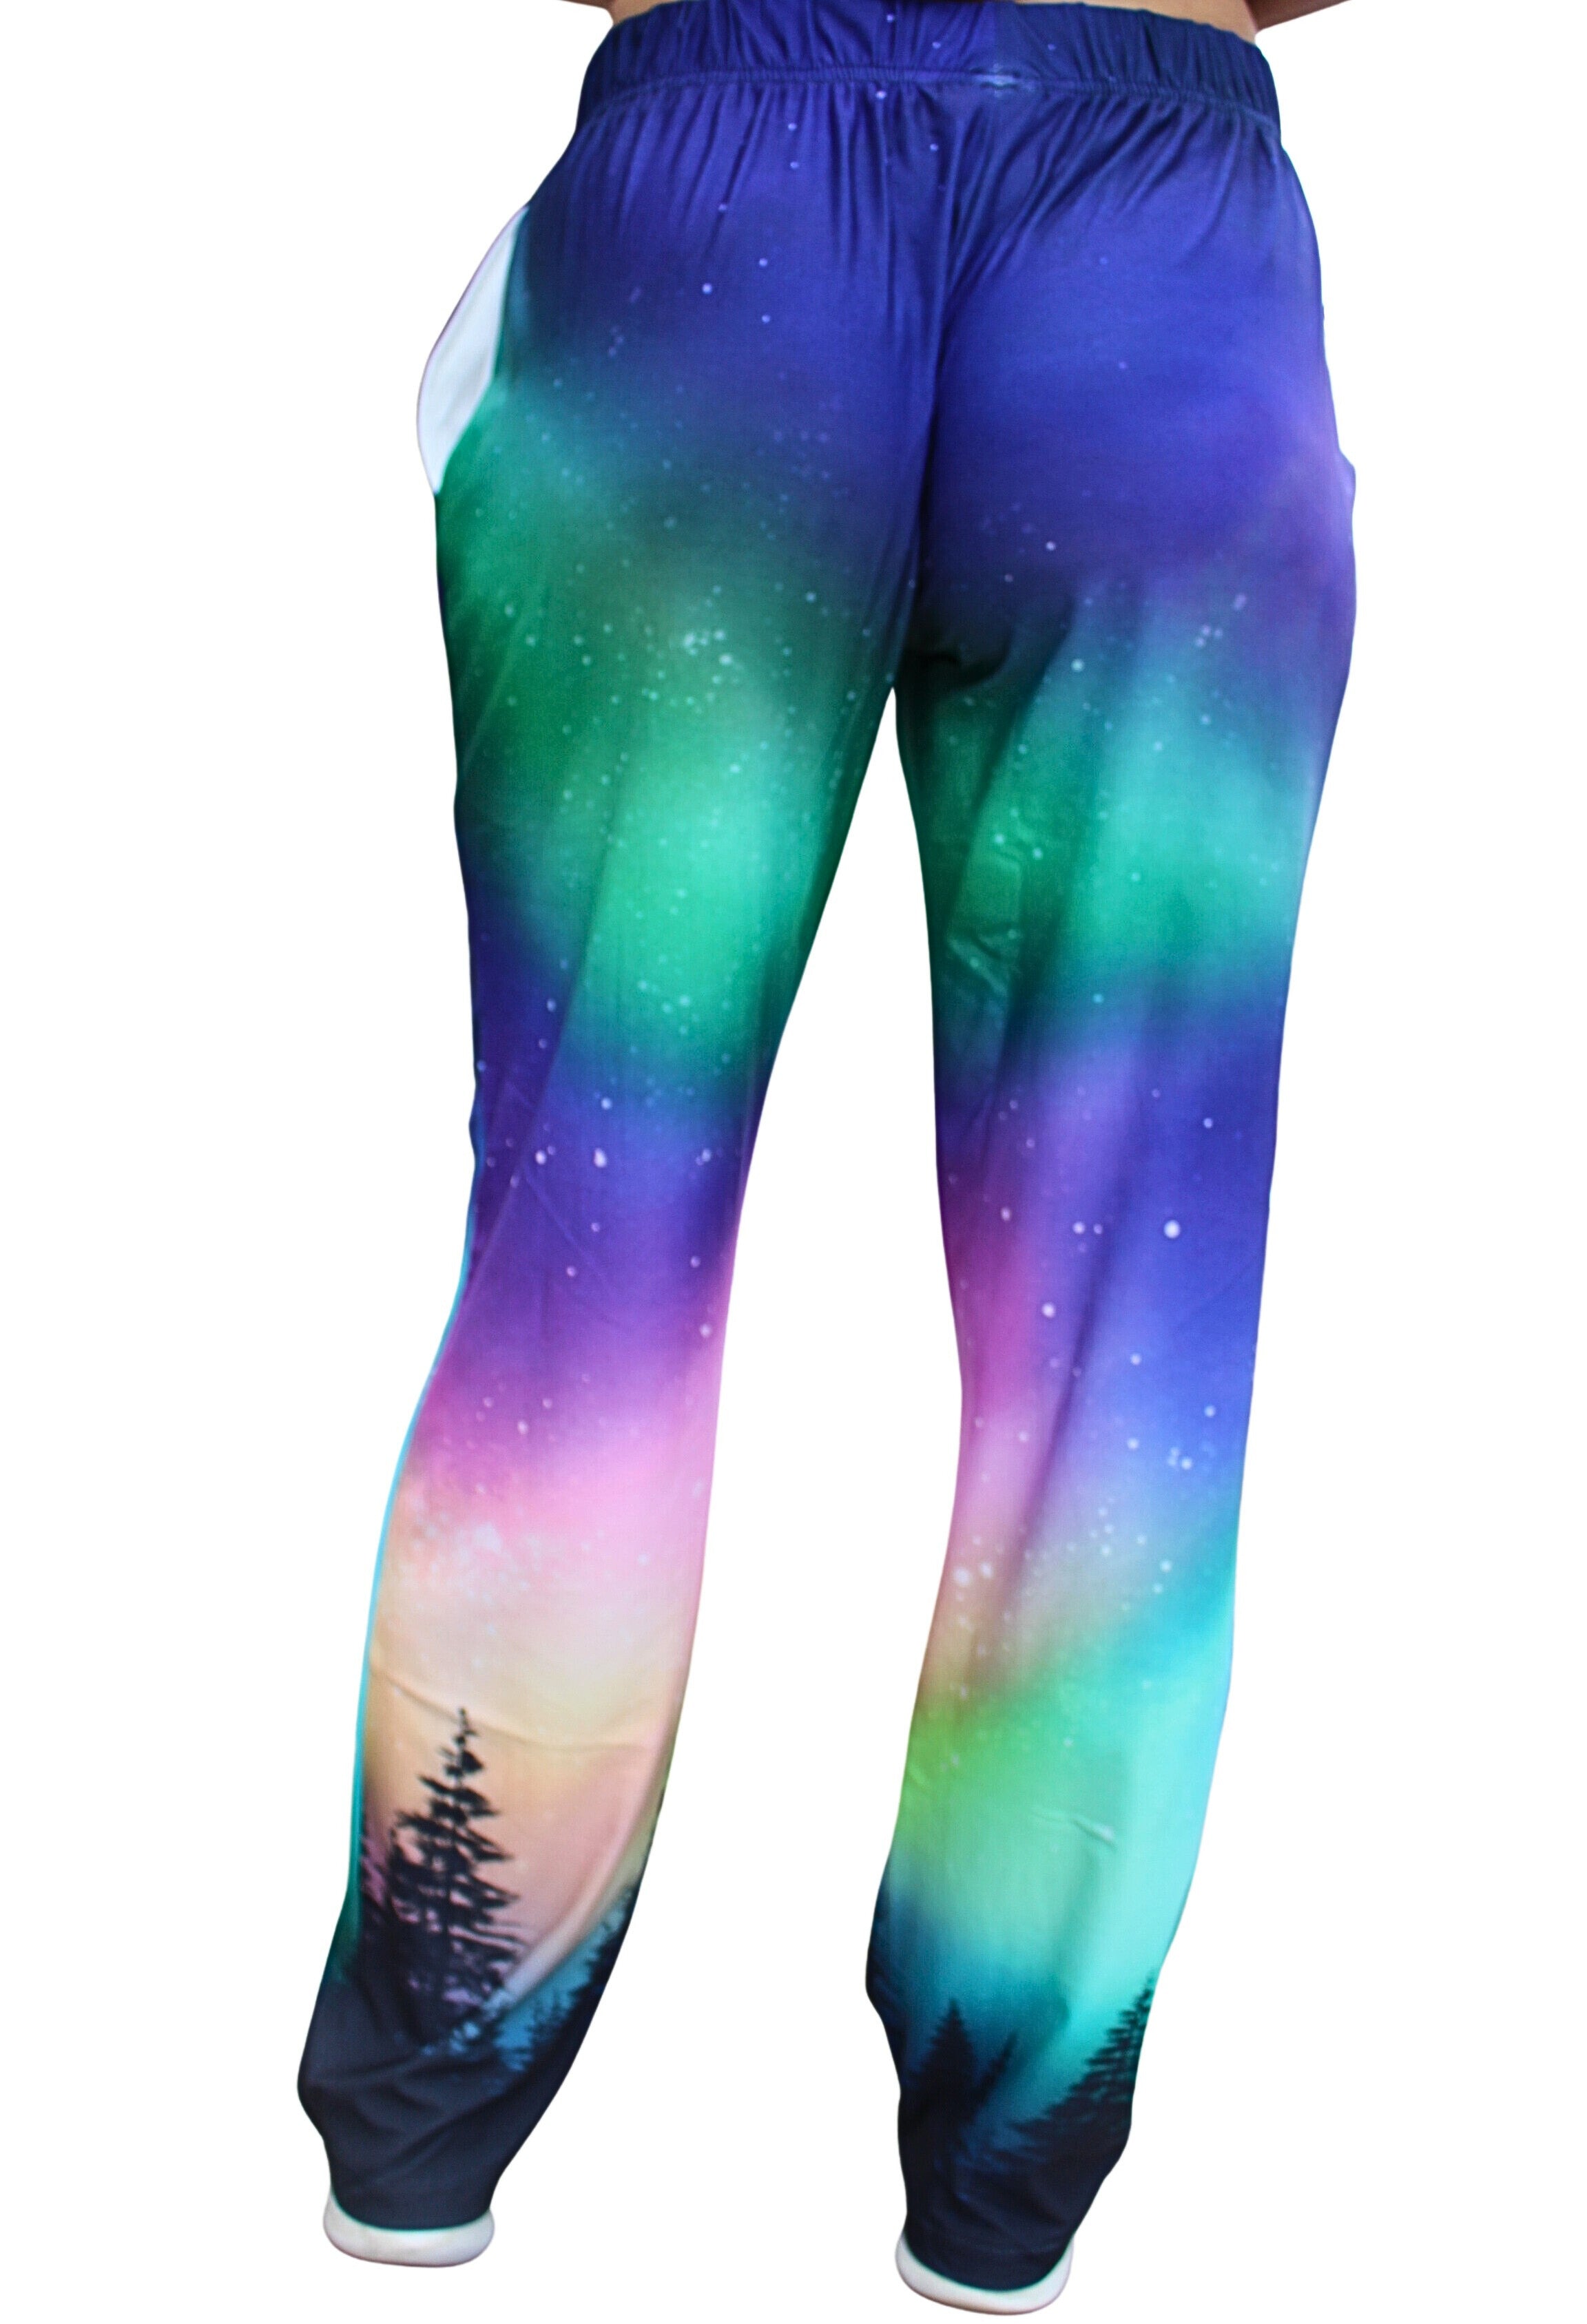 Back view of BRIEF INSANITY Northern Lights Pajama Lounge Pants on model